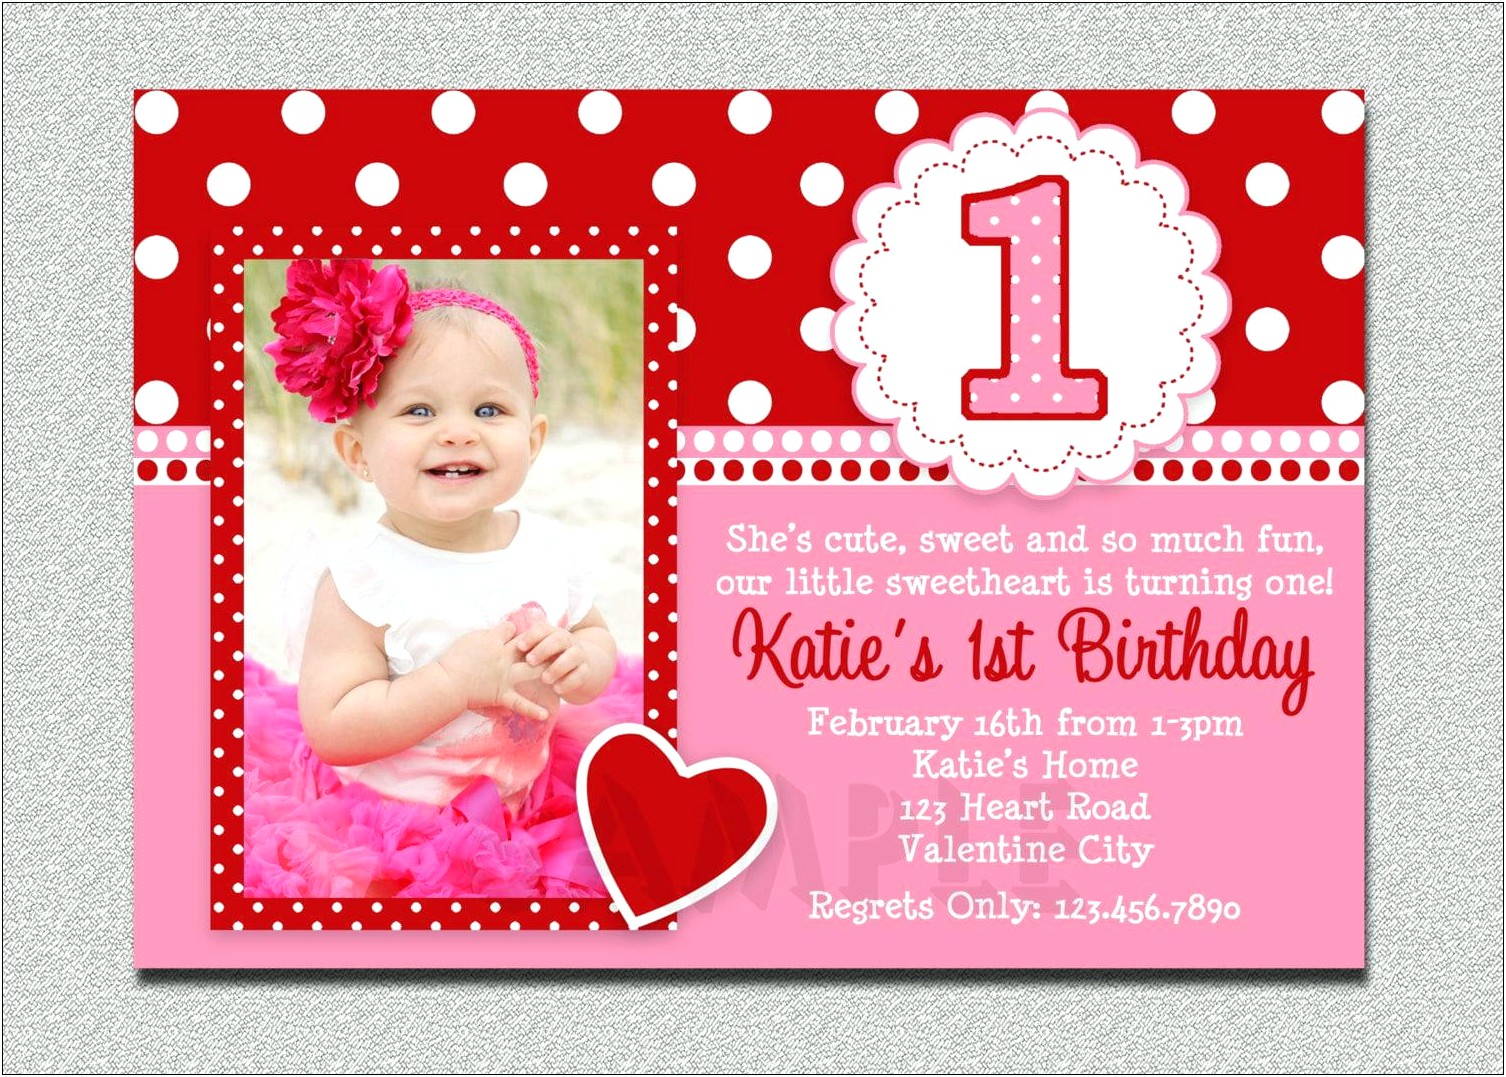 kids-birthday-party-invitation-template-mickey-mouse-invitations